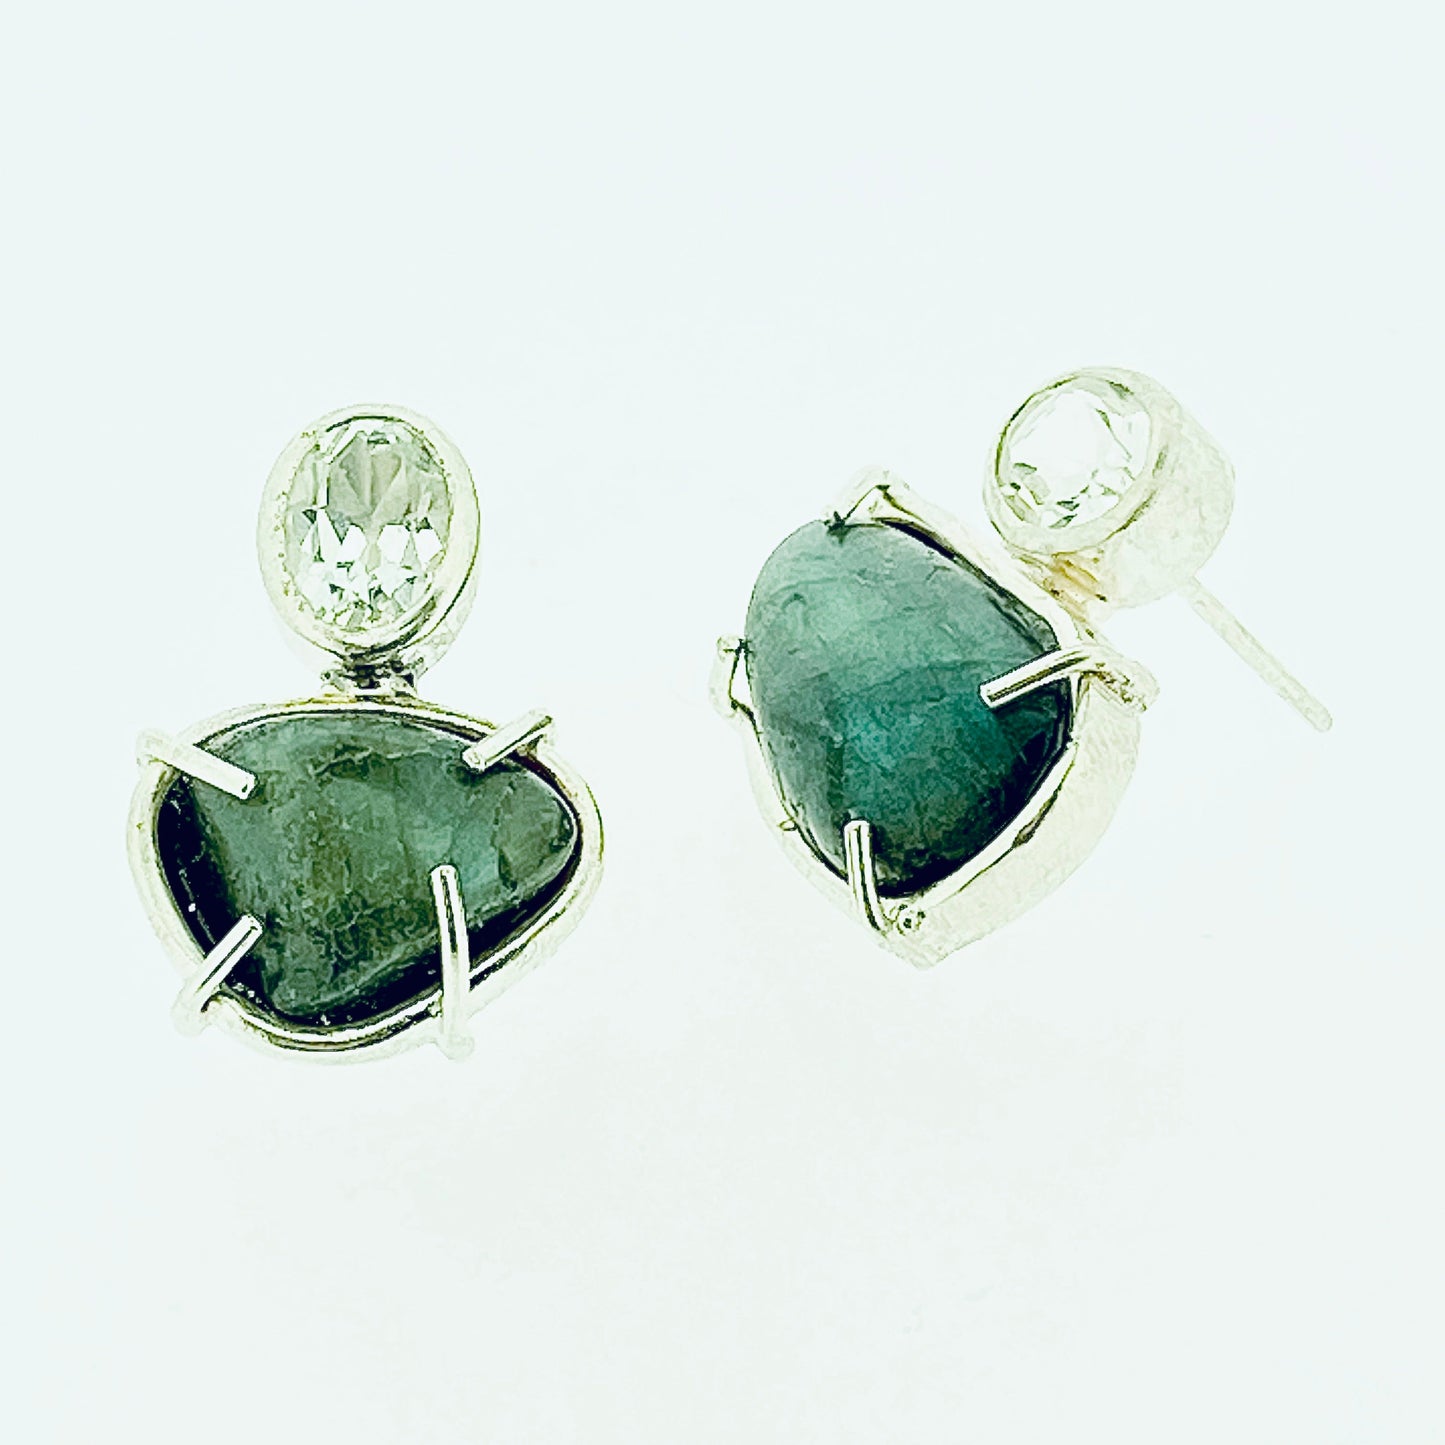 Frontal and side view of Tumbled Labradorite and Topaz Earrings.